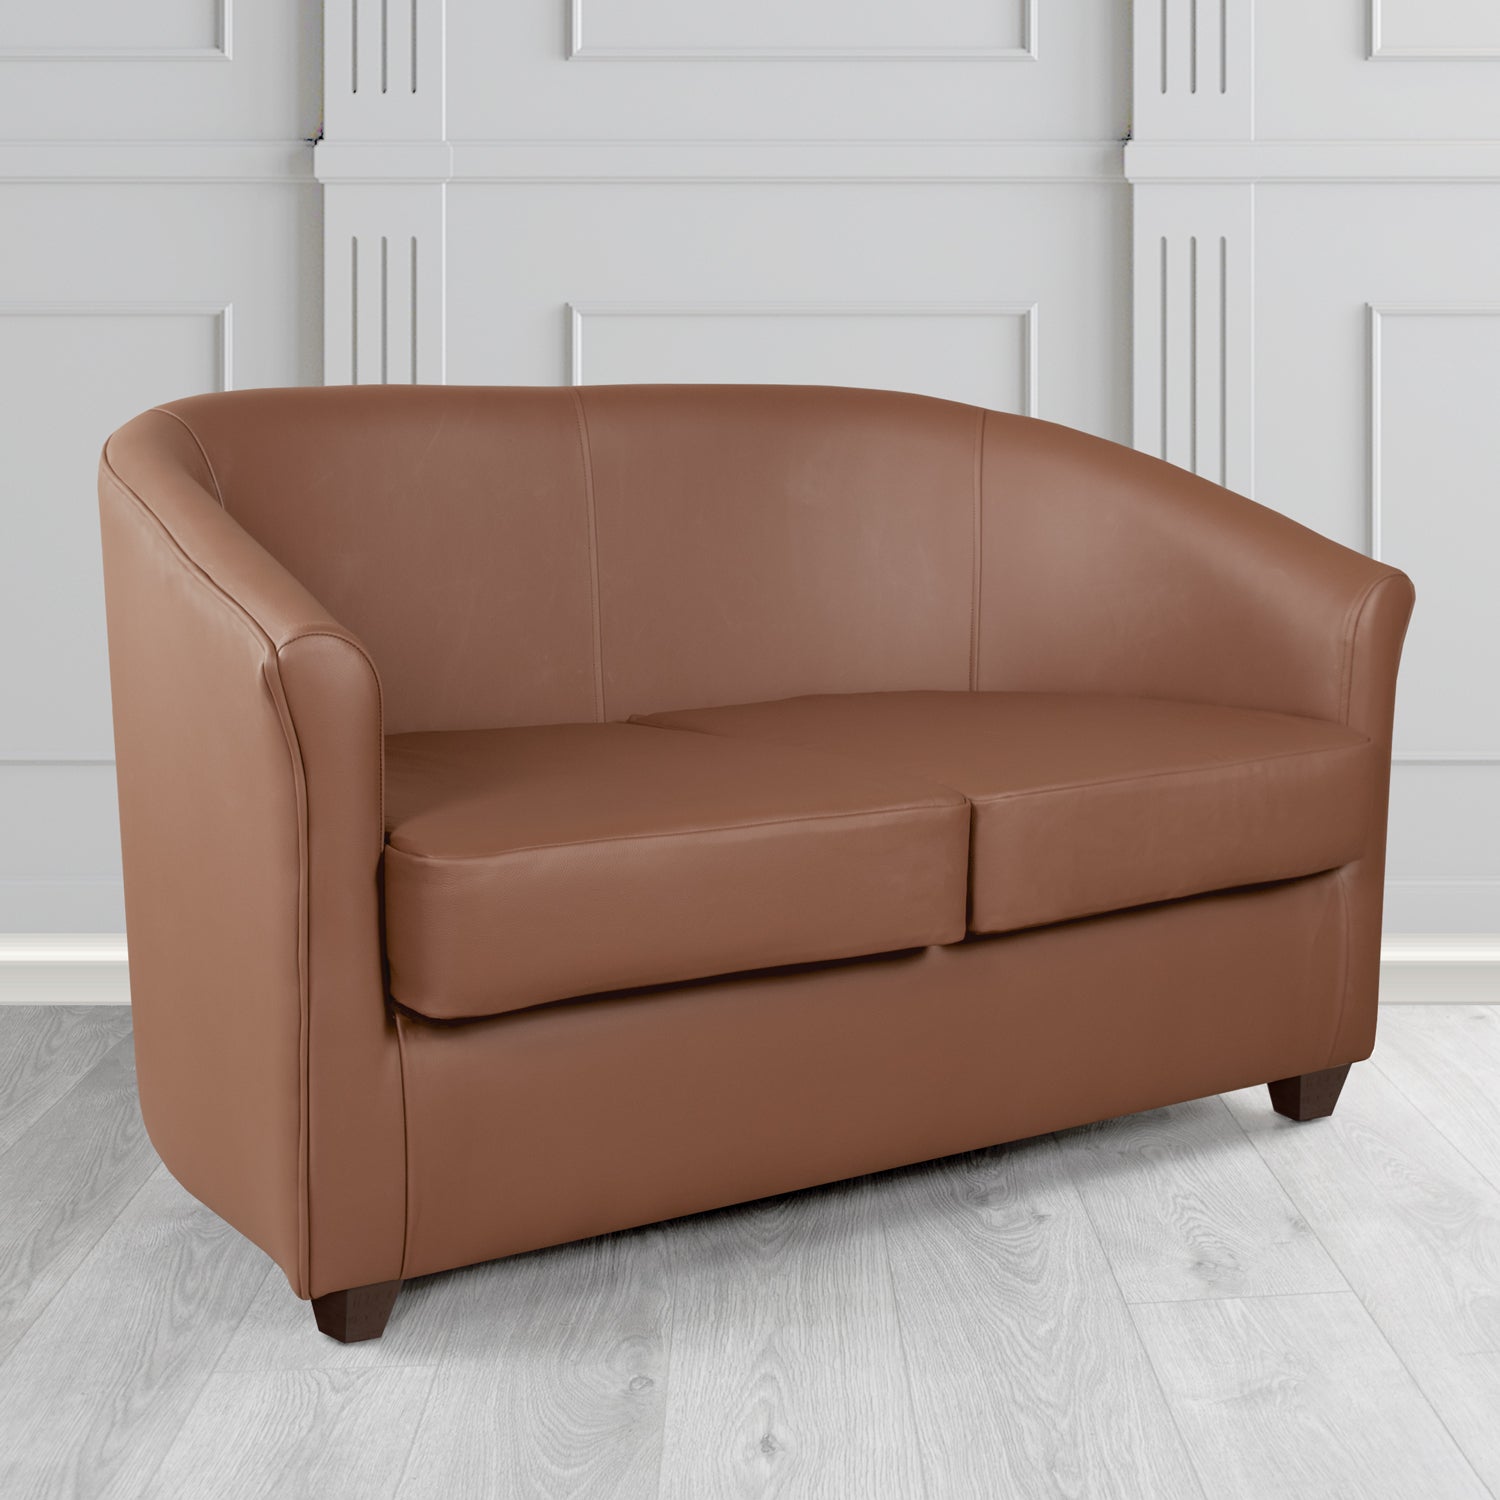 Cannes 2 Seater Tub Sofa in Just Colour Walnut Crib 5 Faux Leather - The Tub Chair Shop